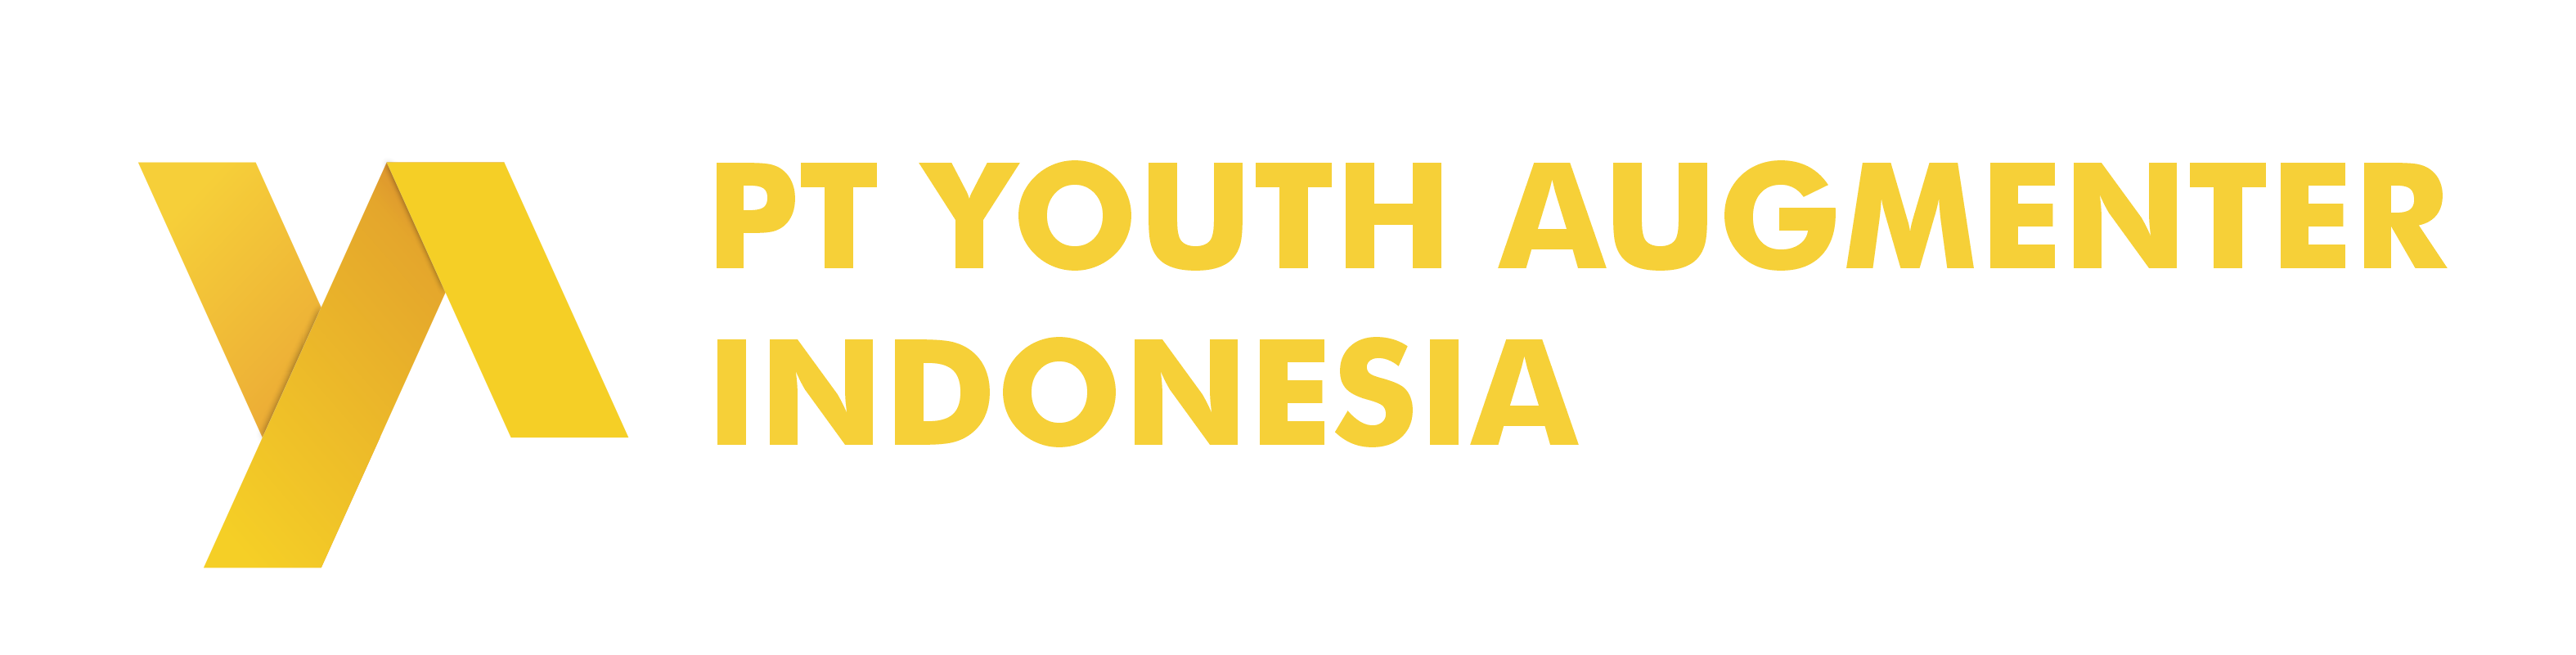 Youth Augmenter